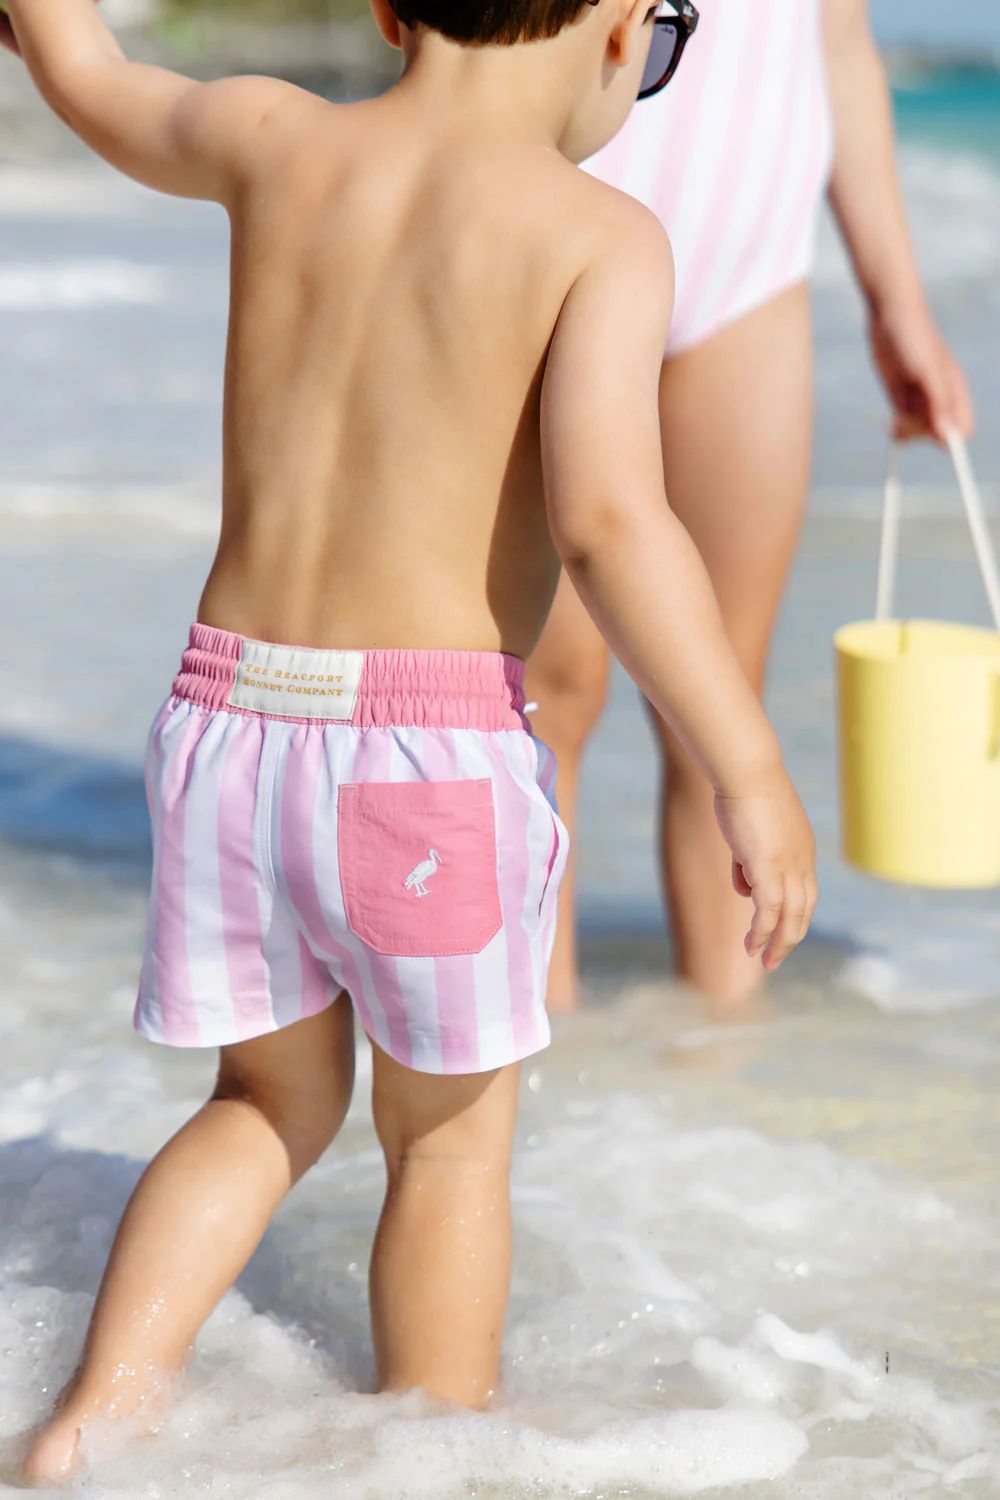 Turtle Bay Trunks - Caicos Cabana Stripe with Hamptons Hot Pink | The Beaufort Bonnet Company